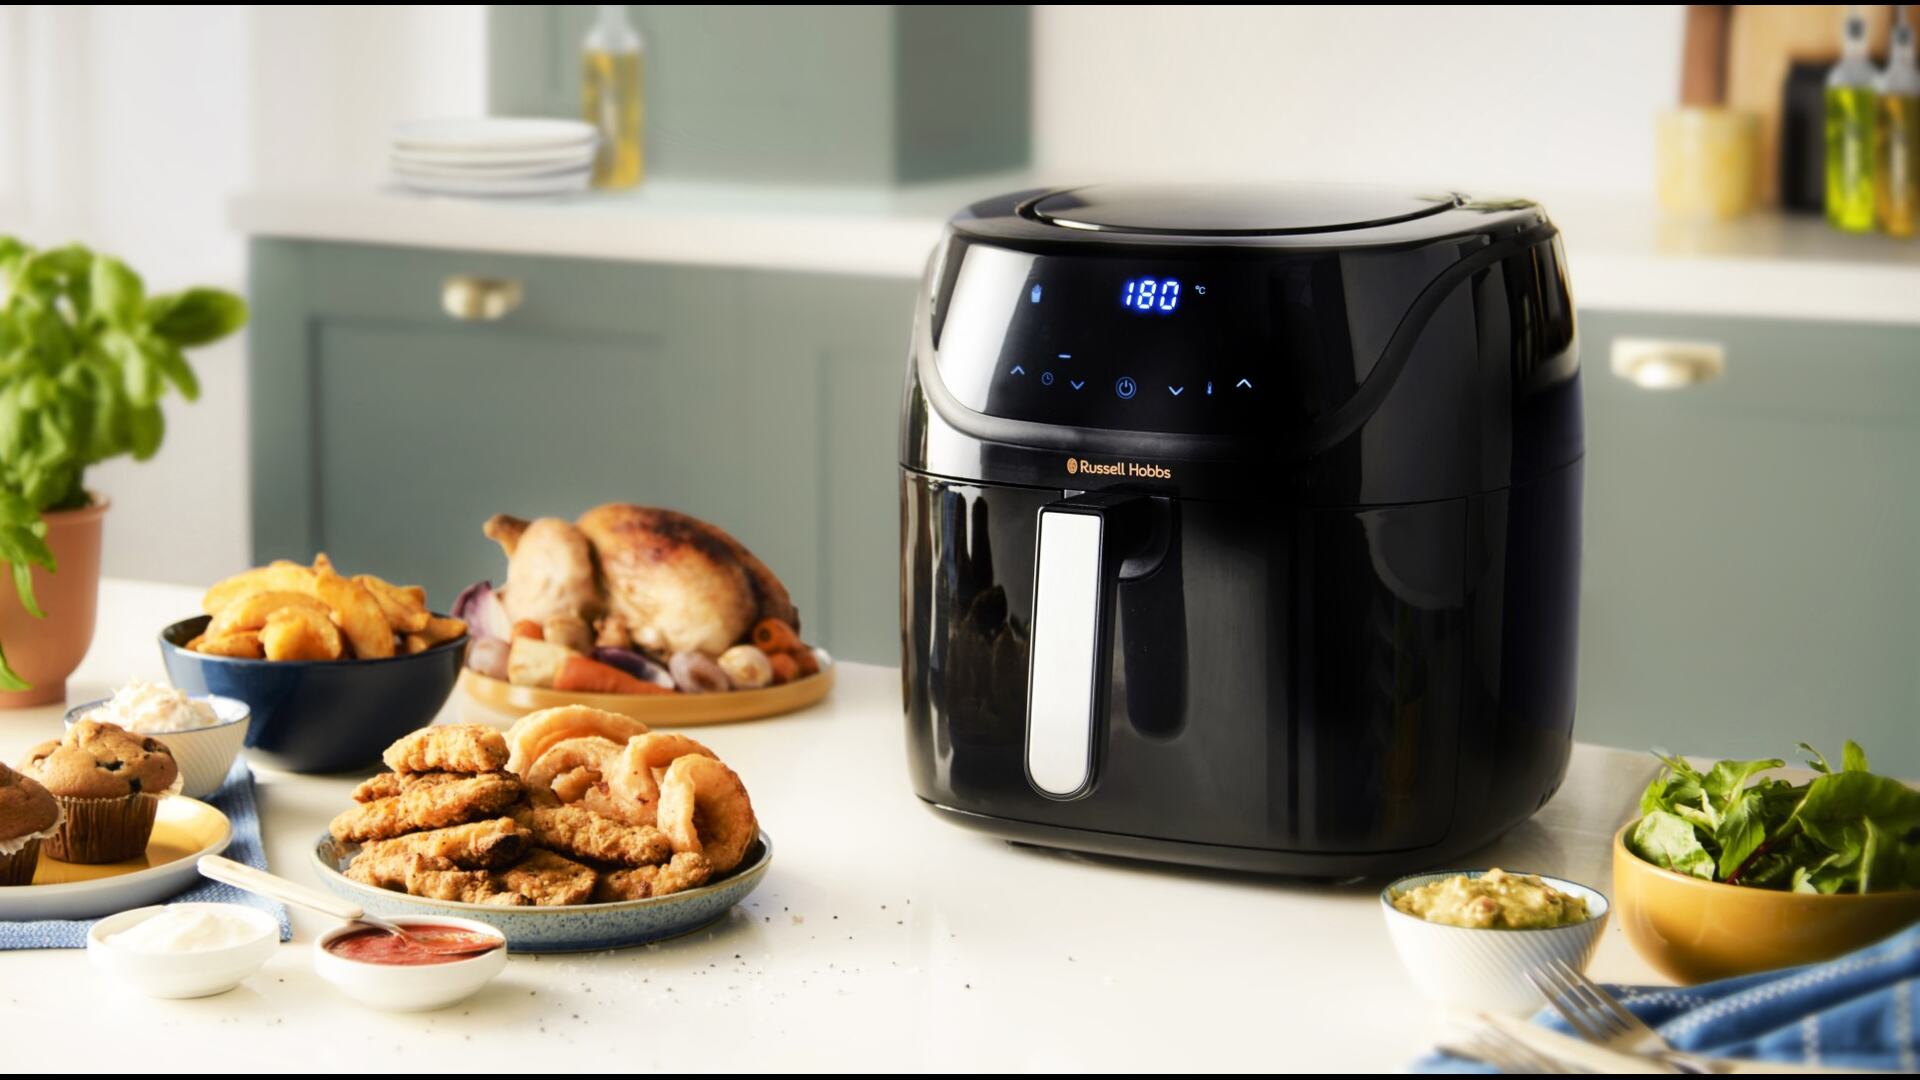 Find The Best Air Fryer For Your Kitchen: The Complete Buying Guide